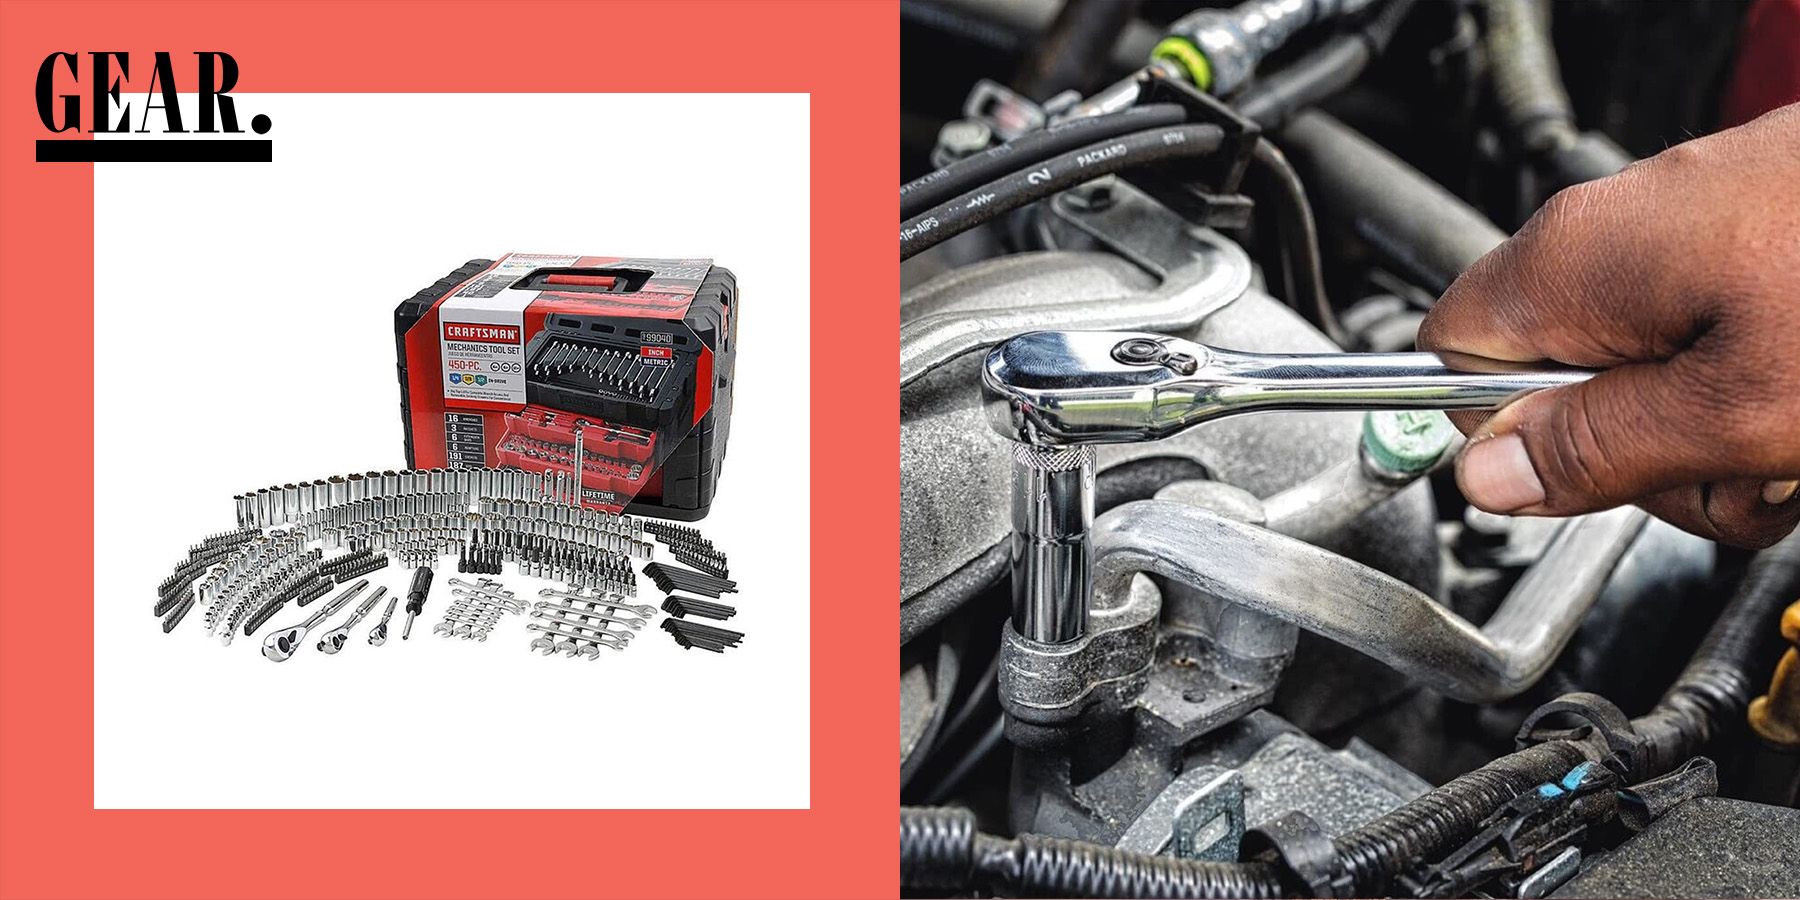 20 Car Mechanic Tools You Need in Your Garage